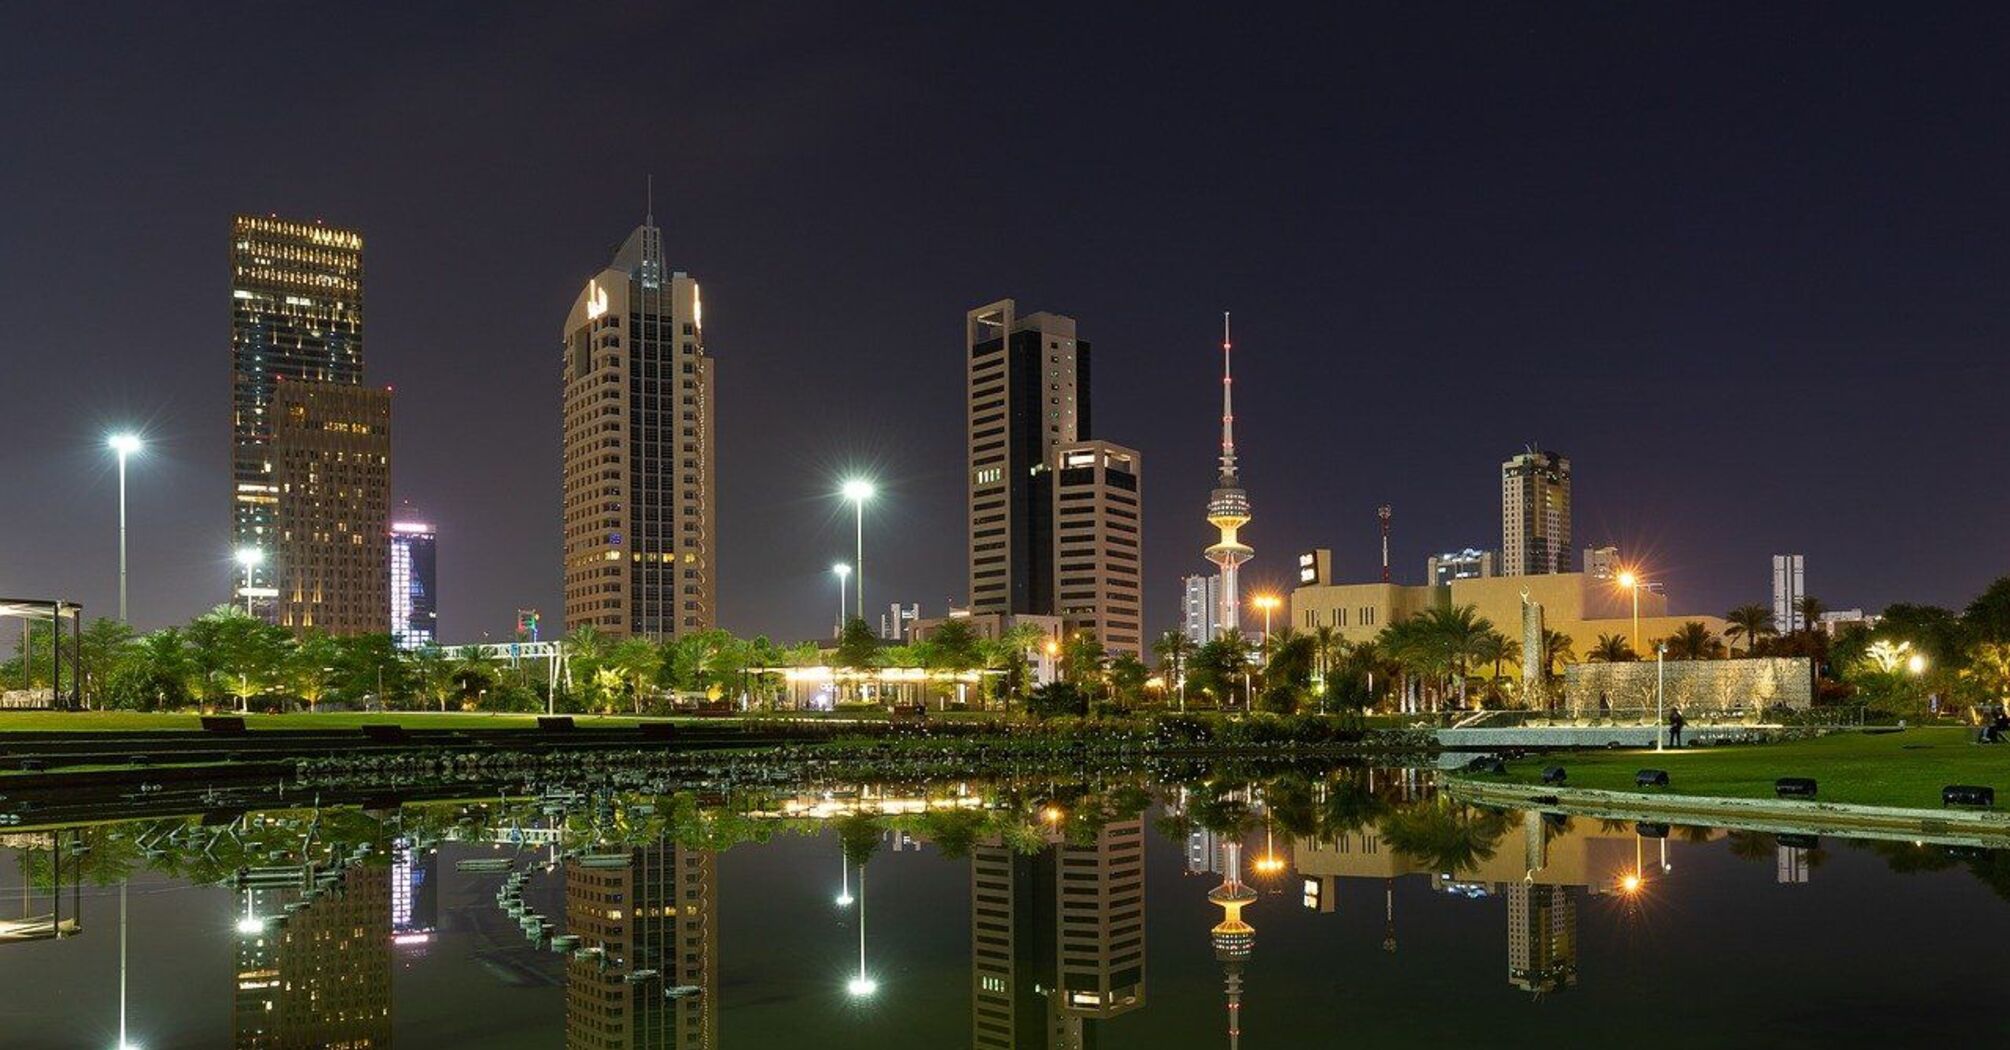 Kuwait is reviewing the rules for issuing family and tourist visas to stimulate growth